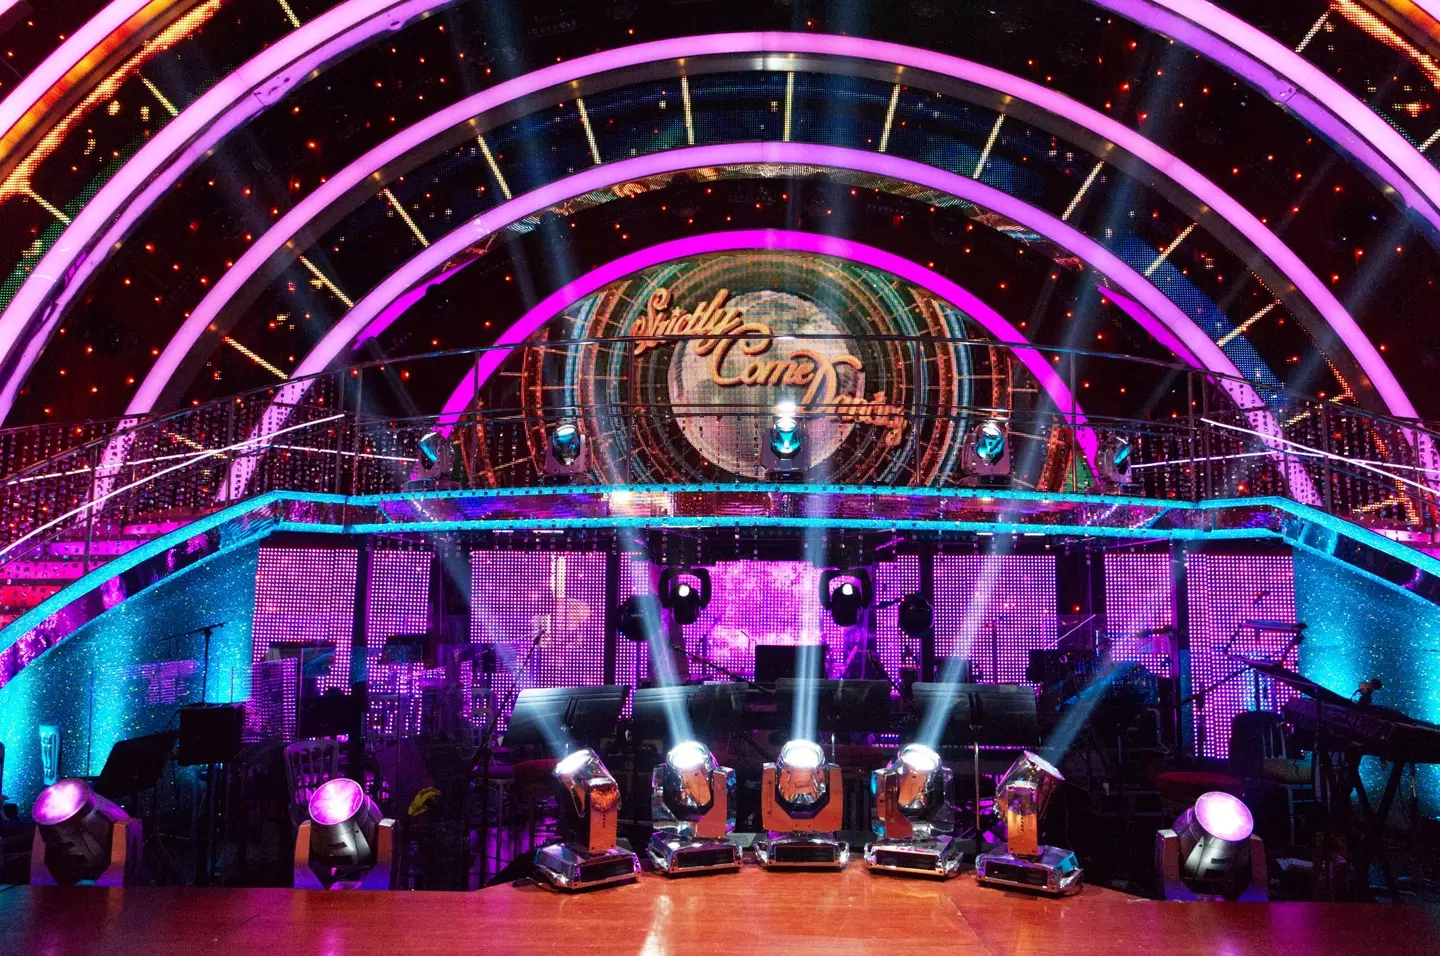 Many a relationship has been tested on the dance floor of Strictly.